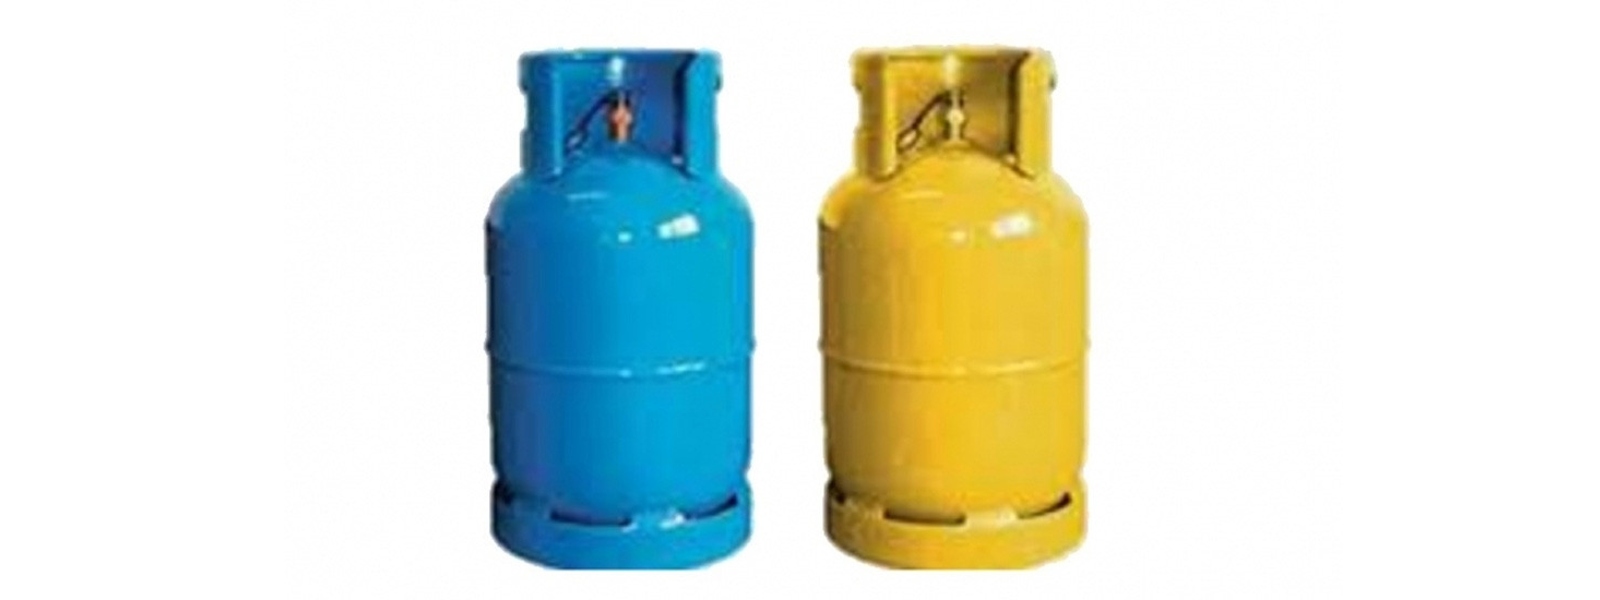 Special Seal of quality assurance for all new gas cylinders